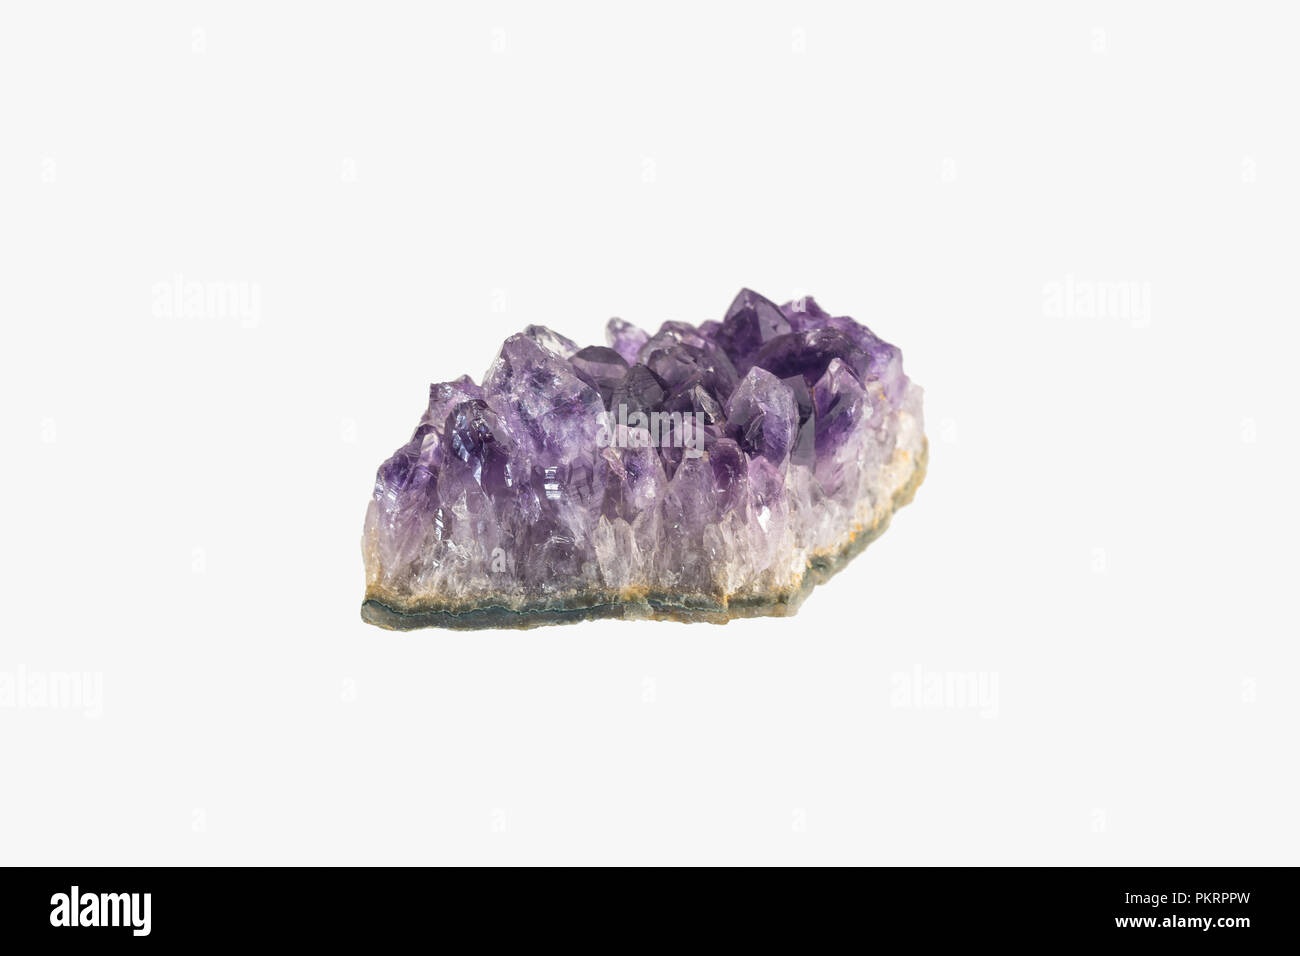 Amethyst druse isolated. Purple rough amethyst crystals. Stock Photo